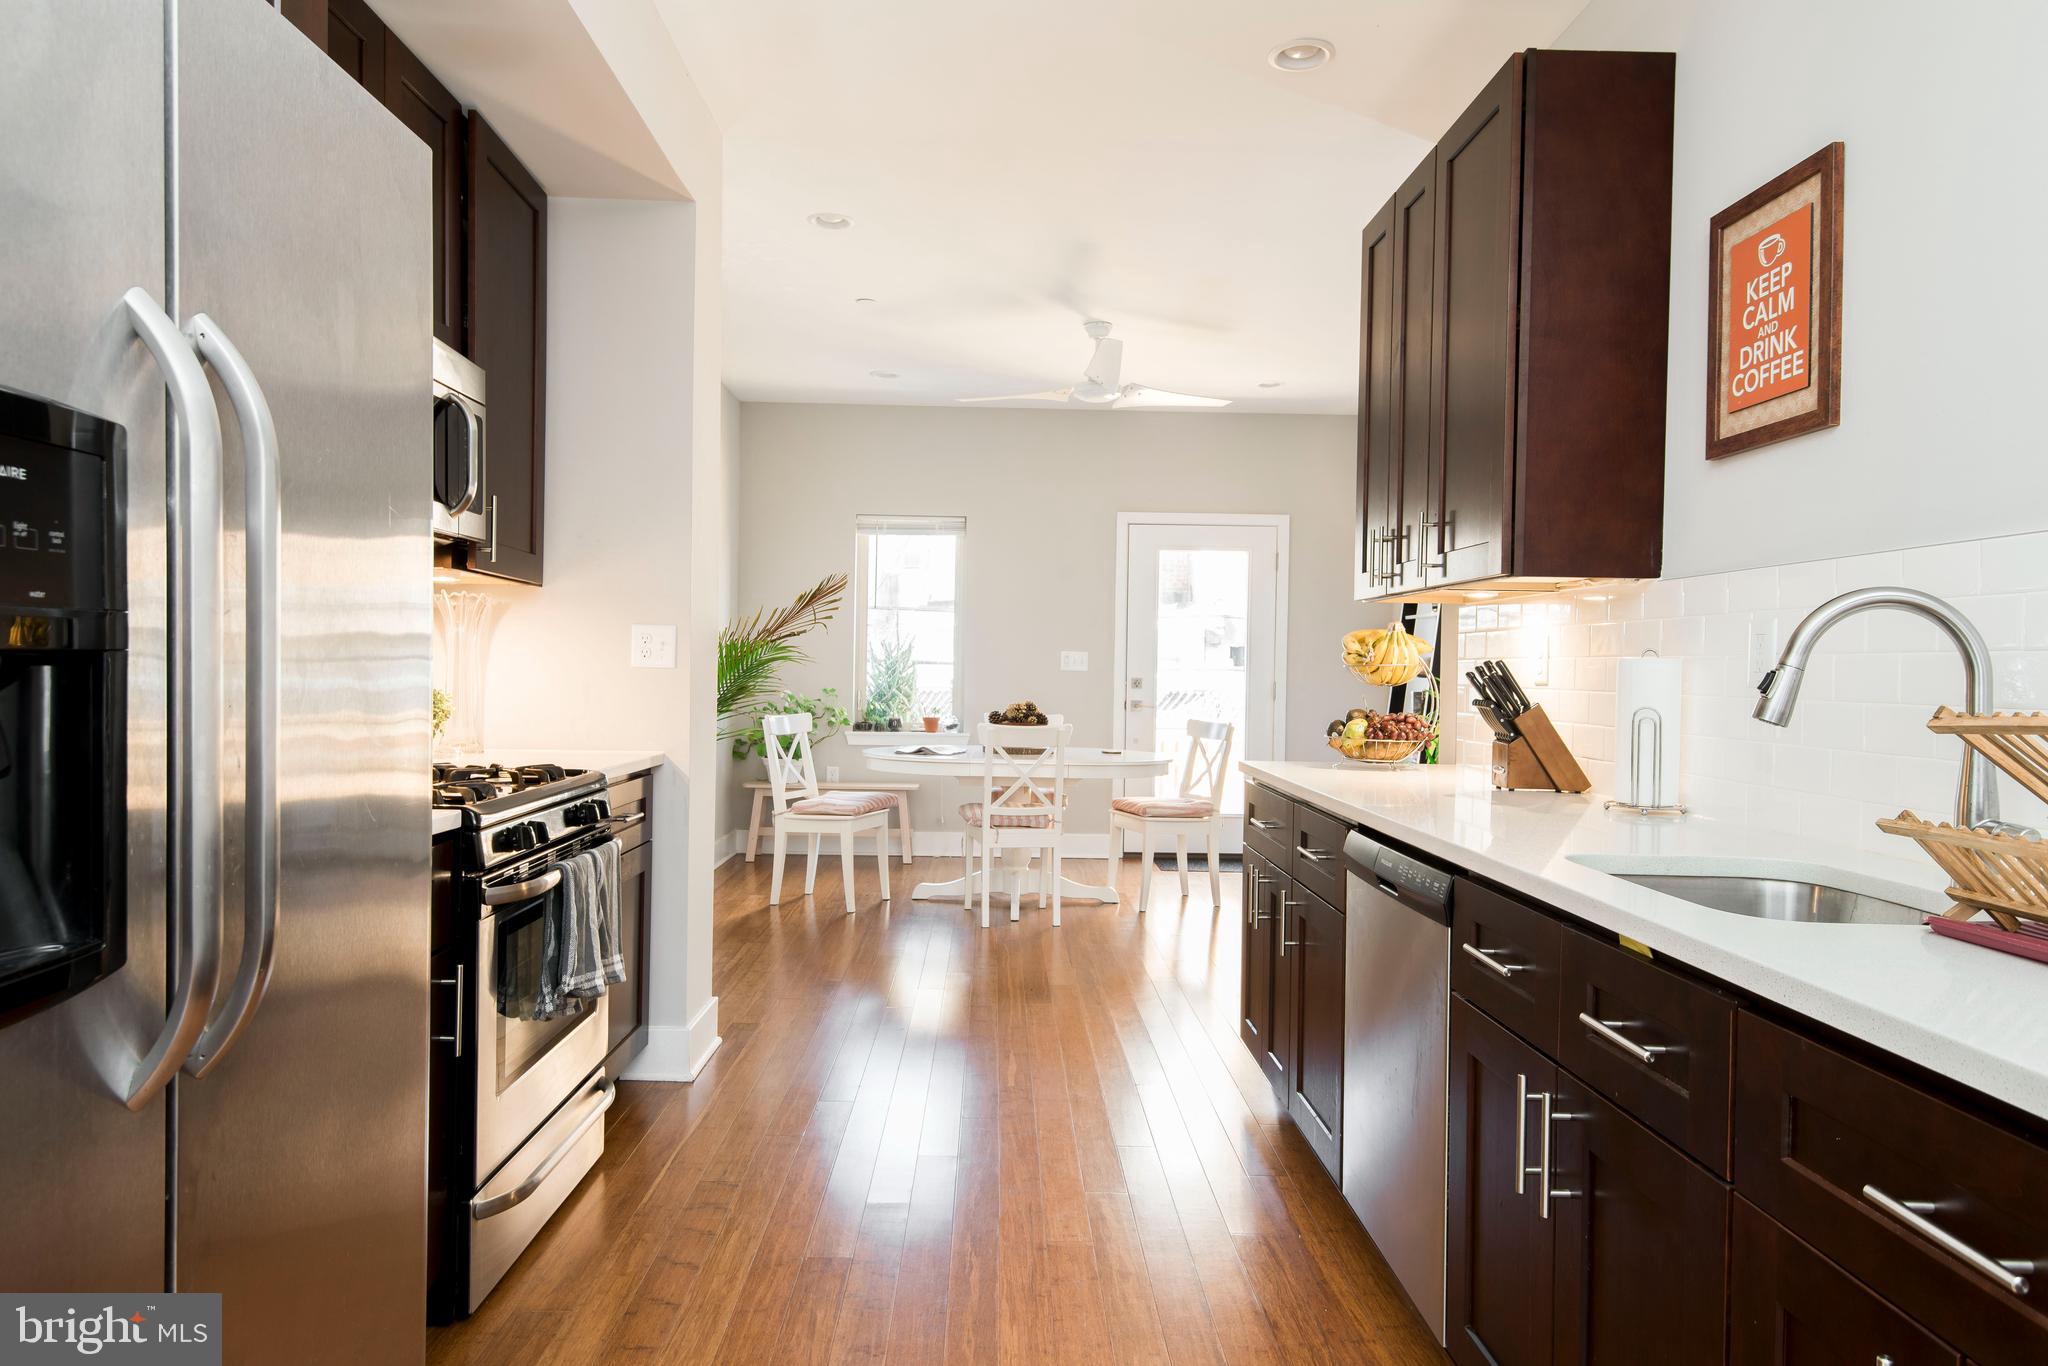 a kitchen with stainless steel appliances a sink dishwasher a refrigerator and wooden floor